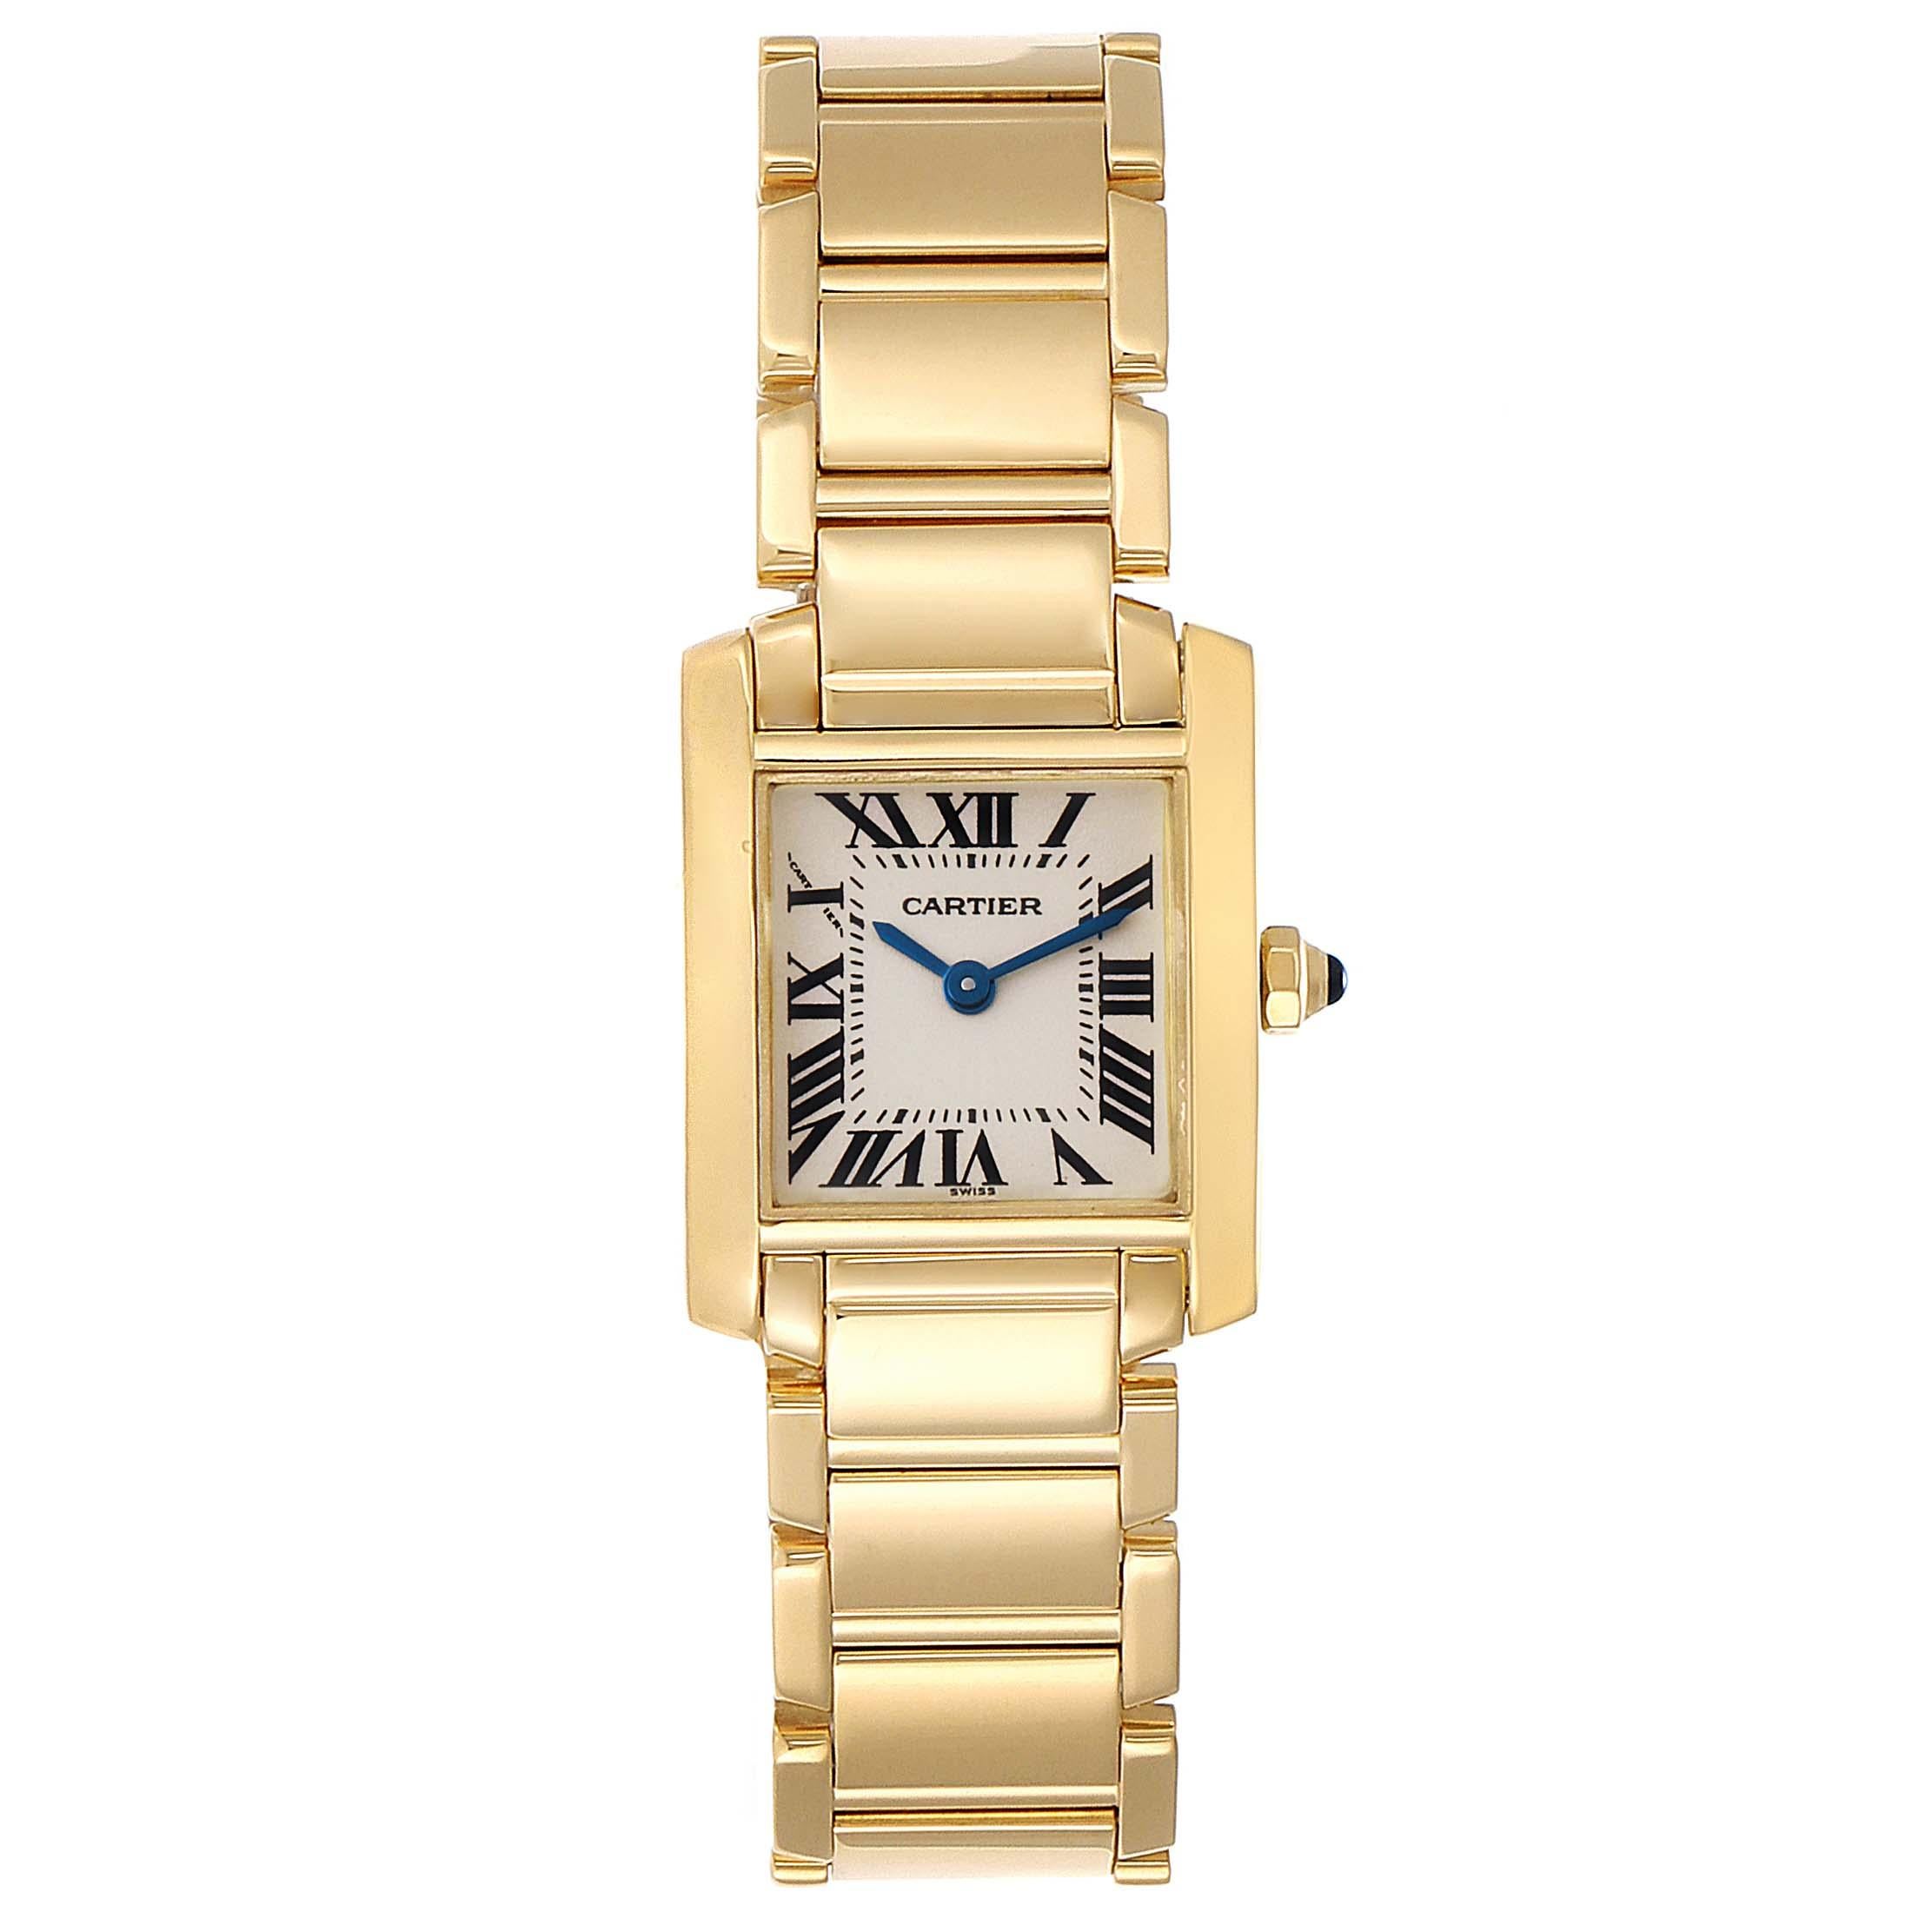 Cartier Tank Francaise Yellow Gold Quartz Ladies Watch W50002N2. Quartz movement. Rectangular 18K yellow gold 20.0 x 25.0 mm case. Octagonal crown set with a blue sapphire cabochon. . Scratch resistant sapphire crystal. Silver dial with painted